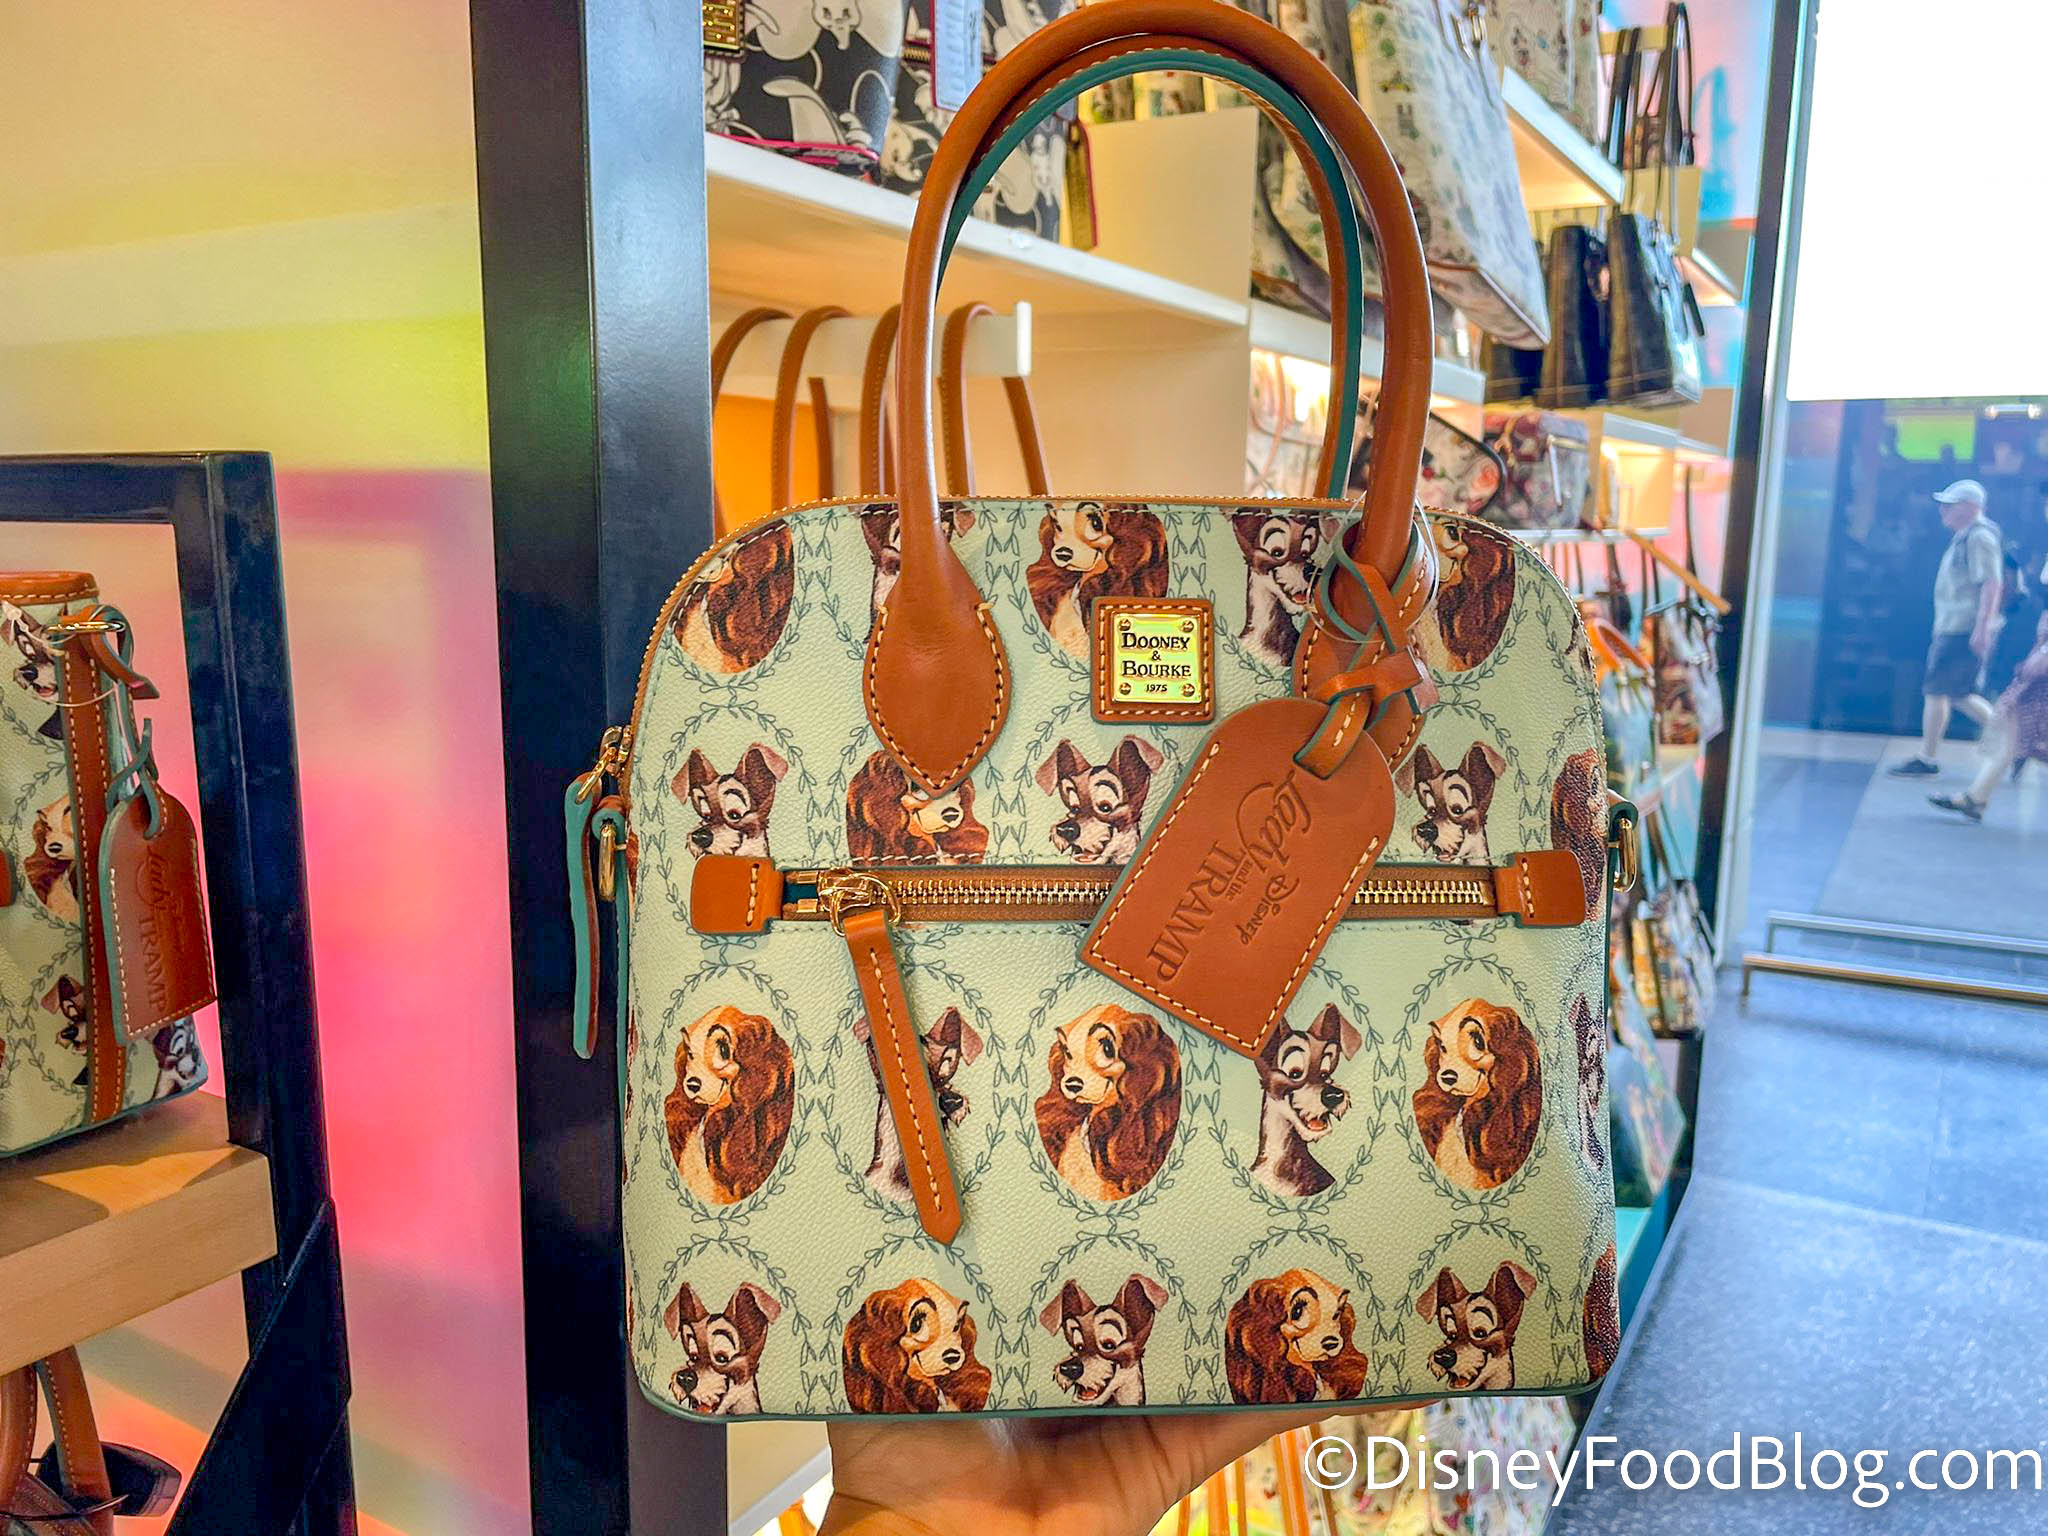 Dooney & Bourke expand MLB collection